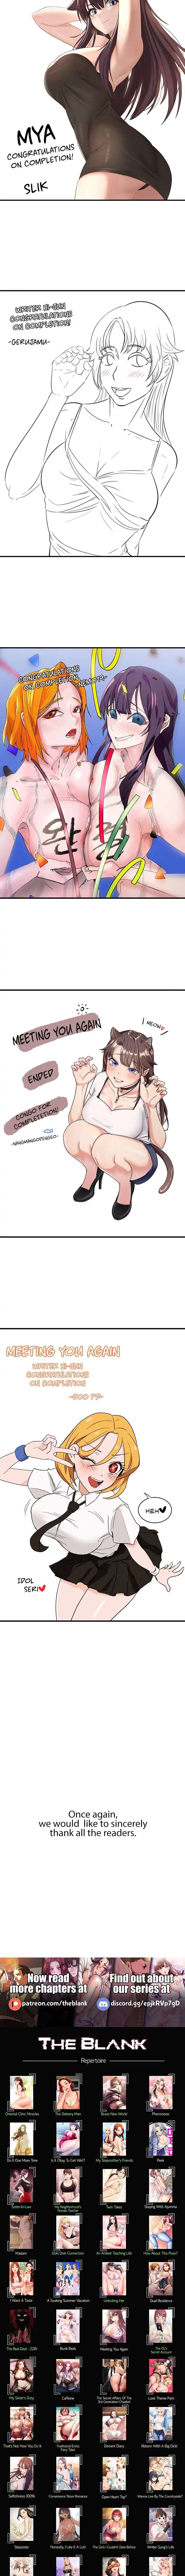 Meeting You Again - Page 3